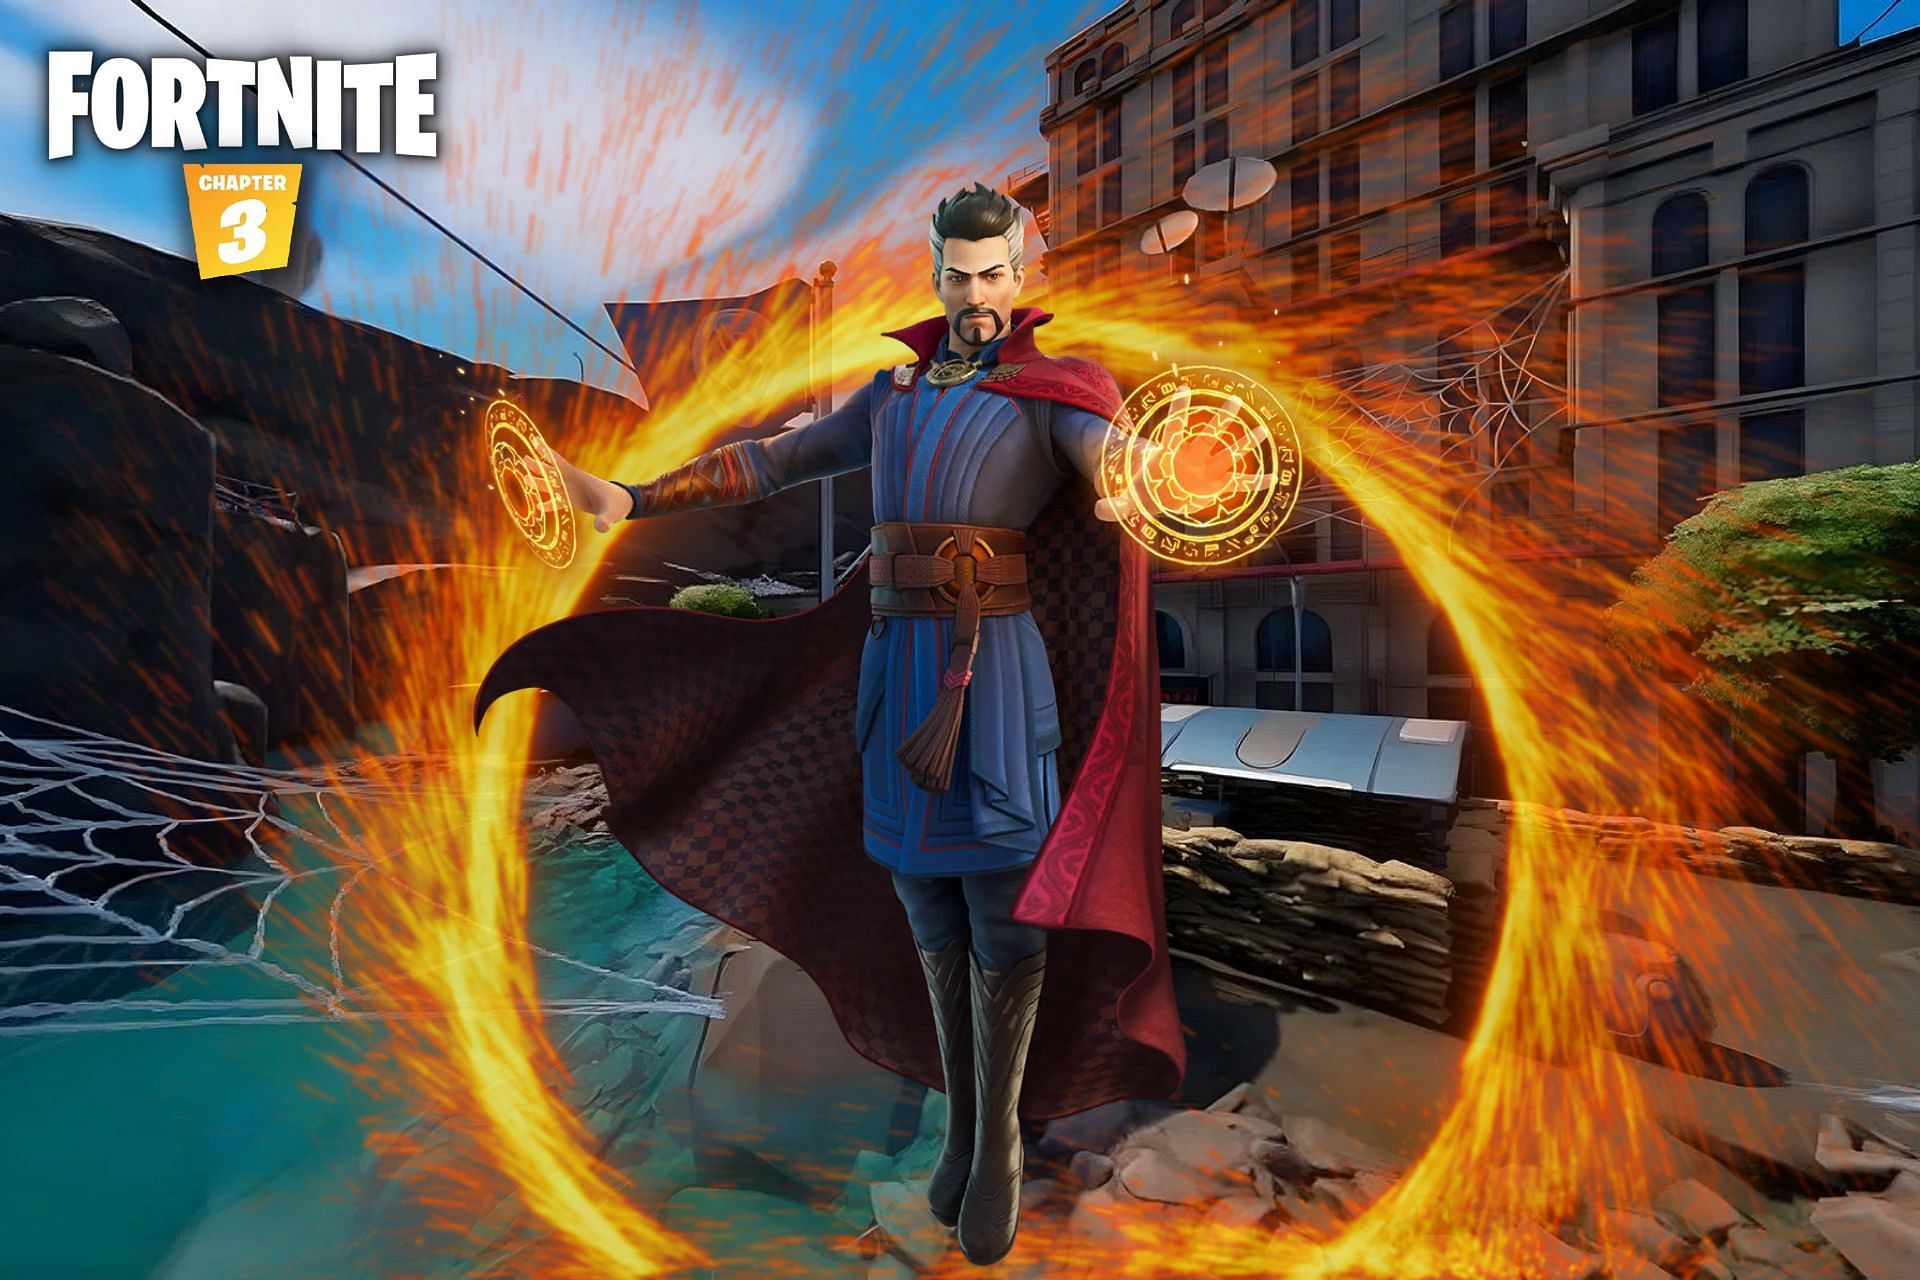 Doctor Strange can be located on the ground floor of the Daily Bugle in Fortnite Chapter 3 Season 2 (Image via Sportskeeda)